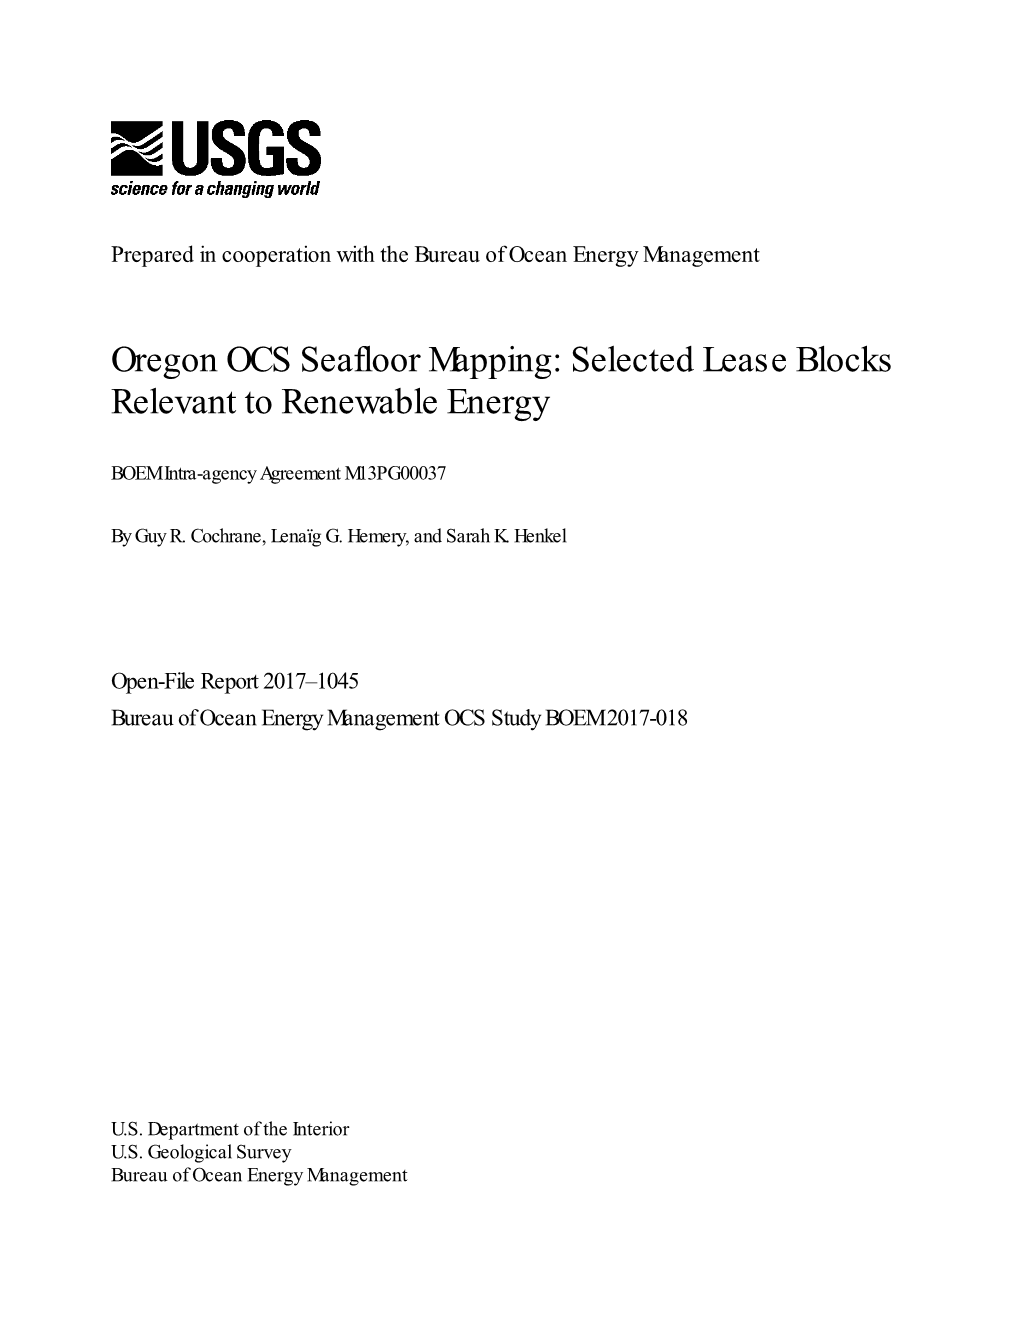 Oregon OCS Seafloor Mapping: Selected Lease Blocks Relevant to Renewable Energy